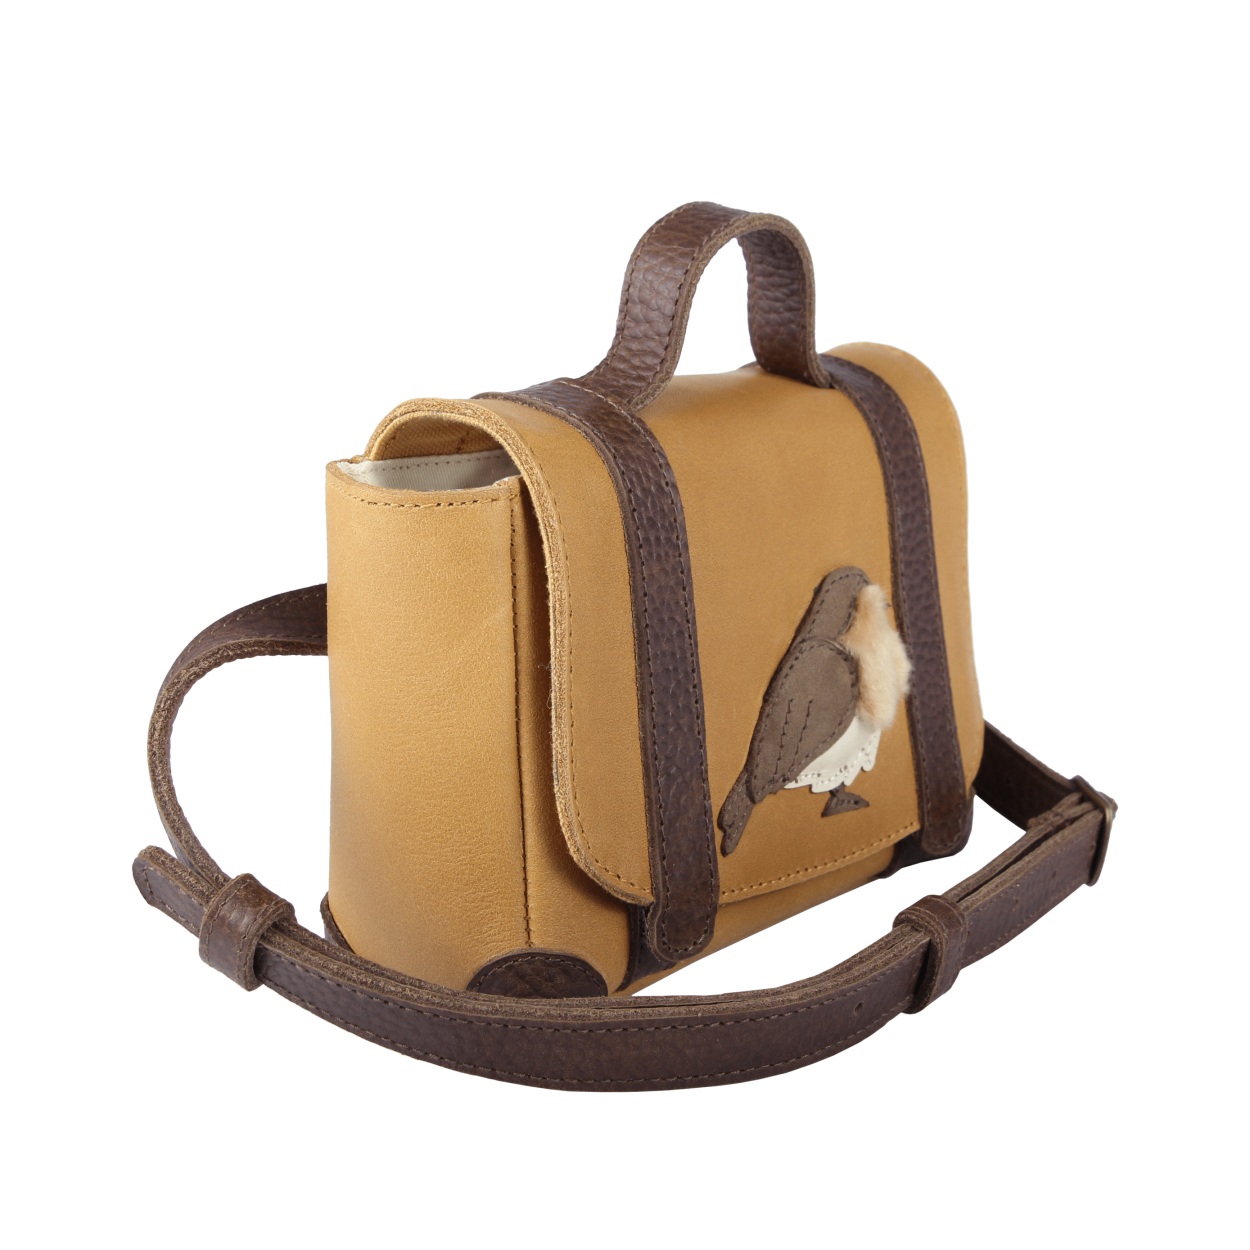 Trychel Bum Bag | Robin | Camel Classic Leather